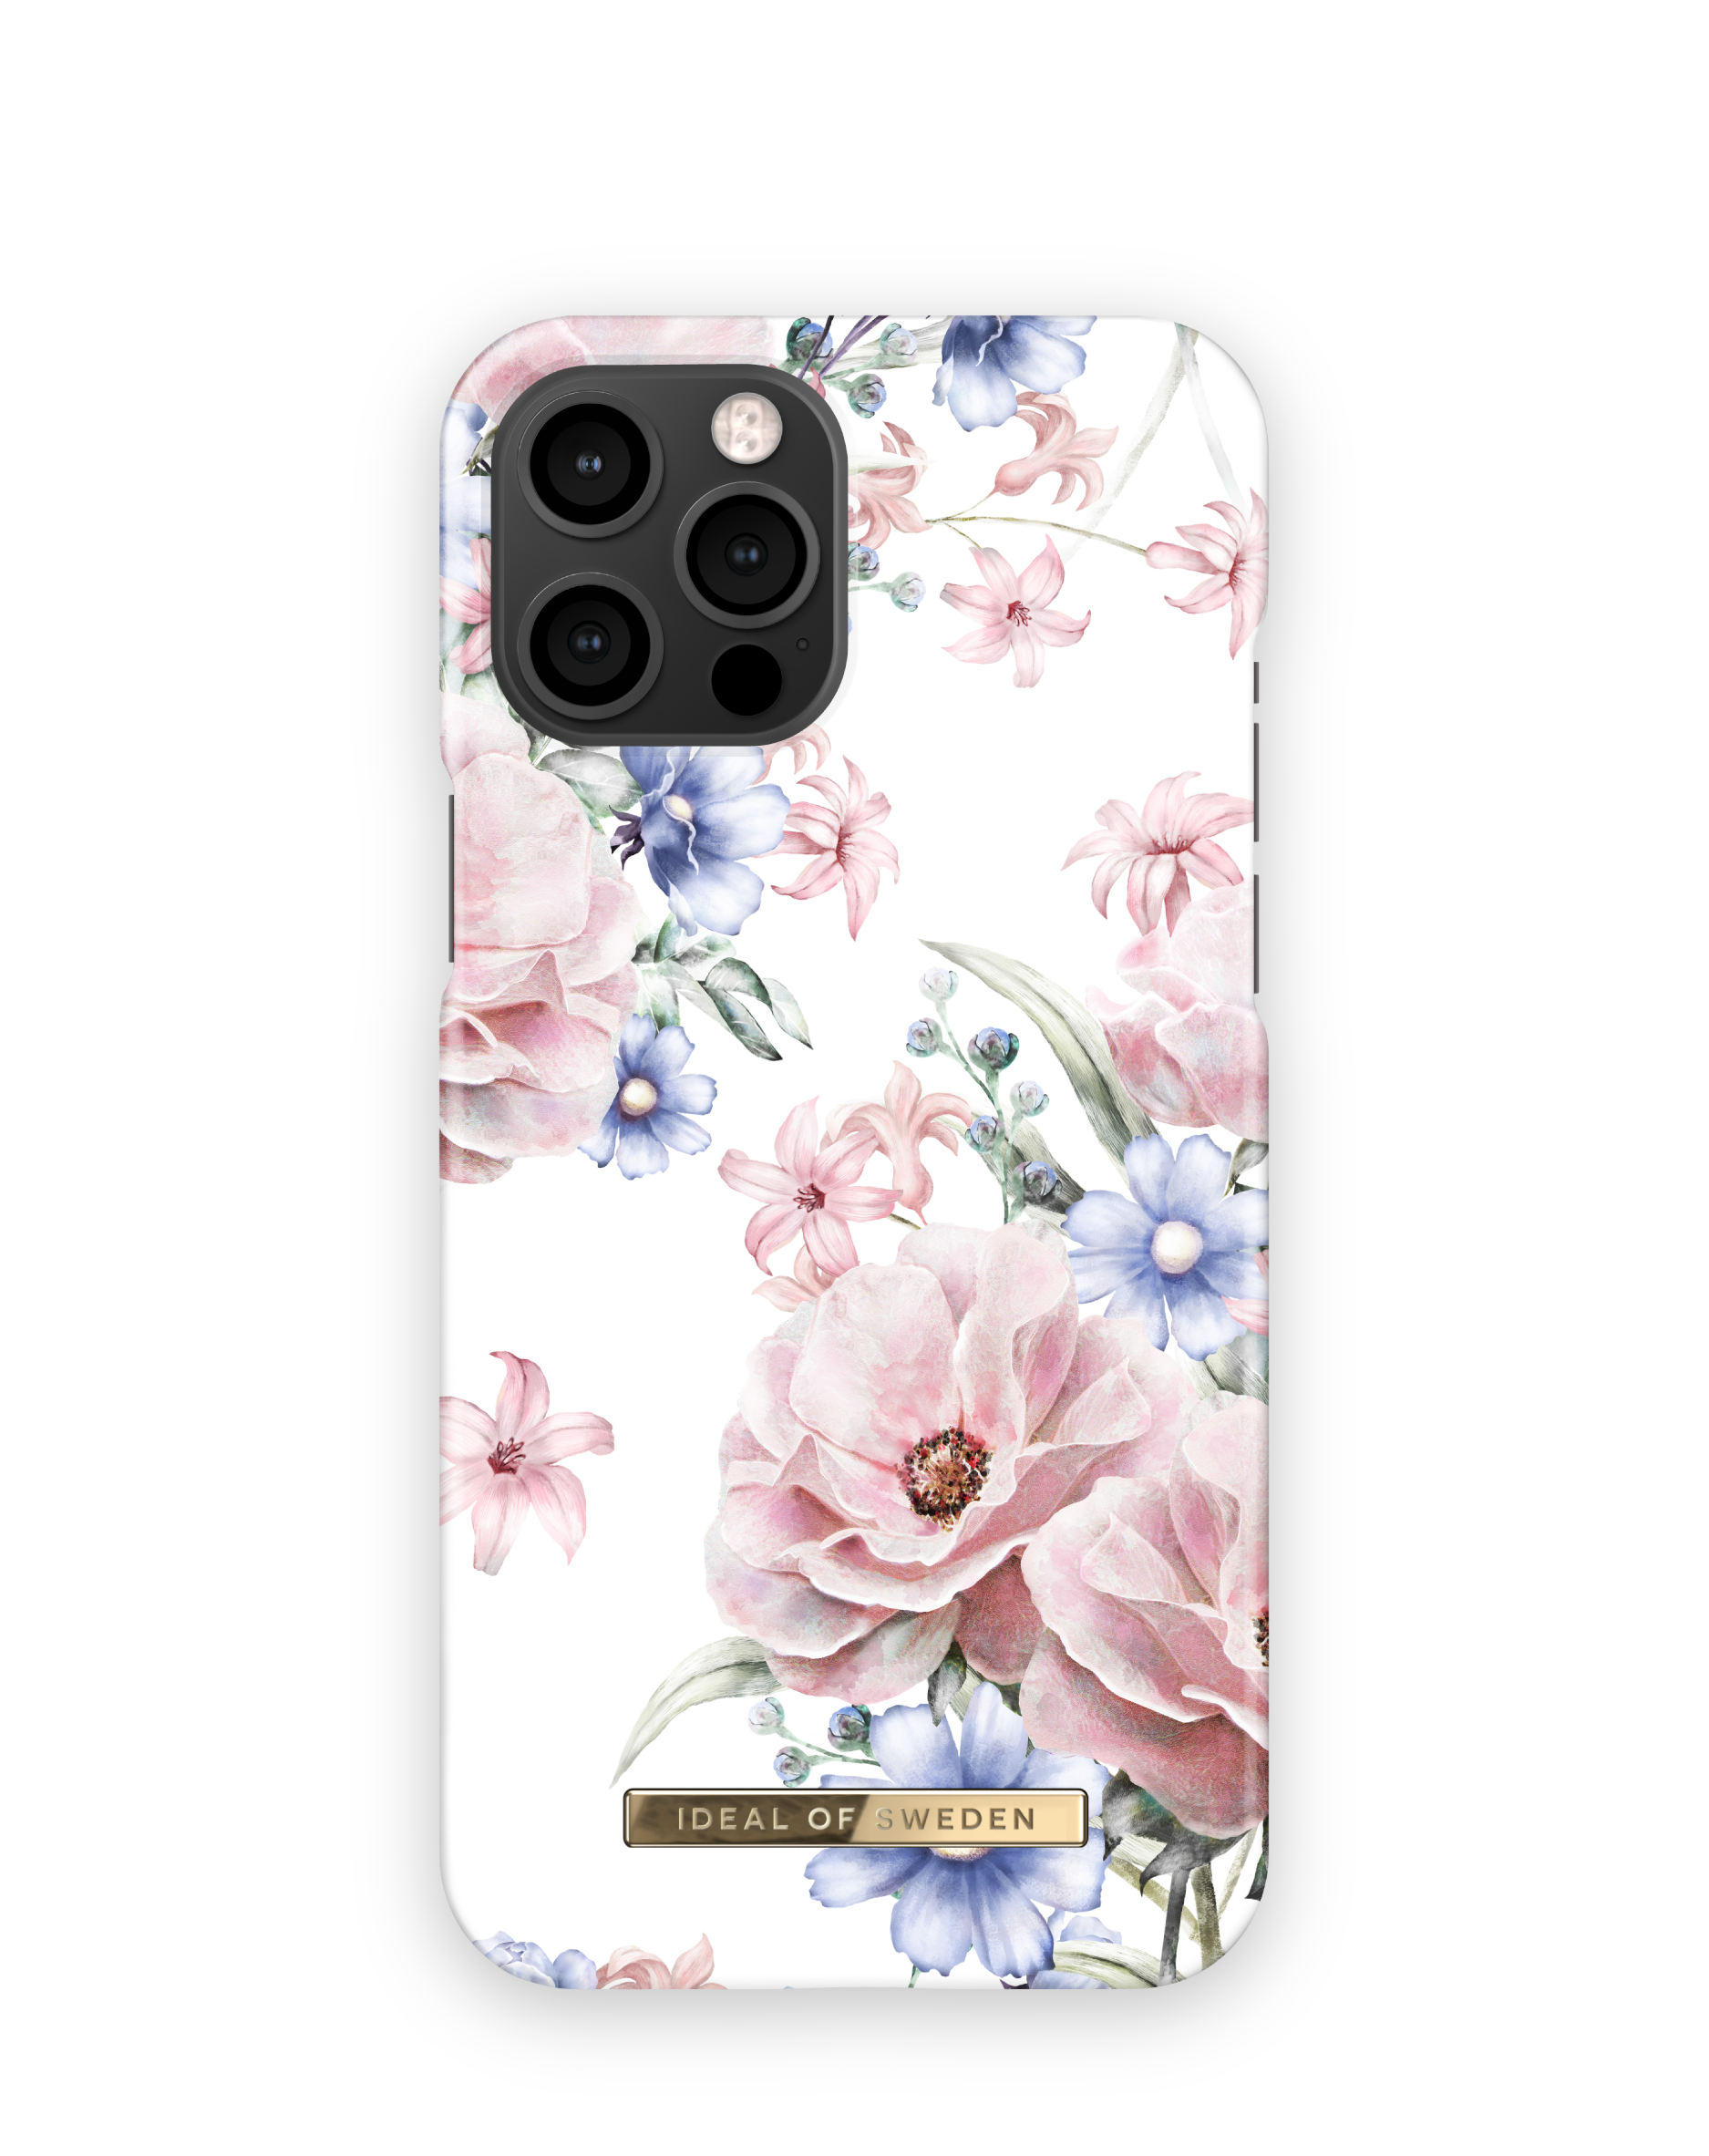 SWEDEN OF Max, 13 iPhone Apple, Floral IDEAL Pro Romance Backcover, IDFCS17-I2167-58,